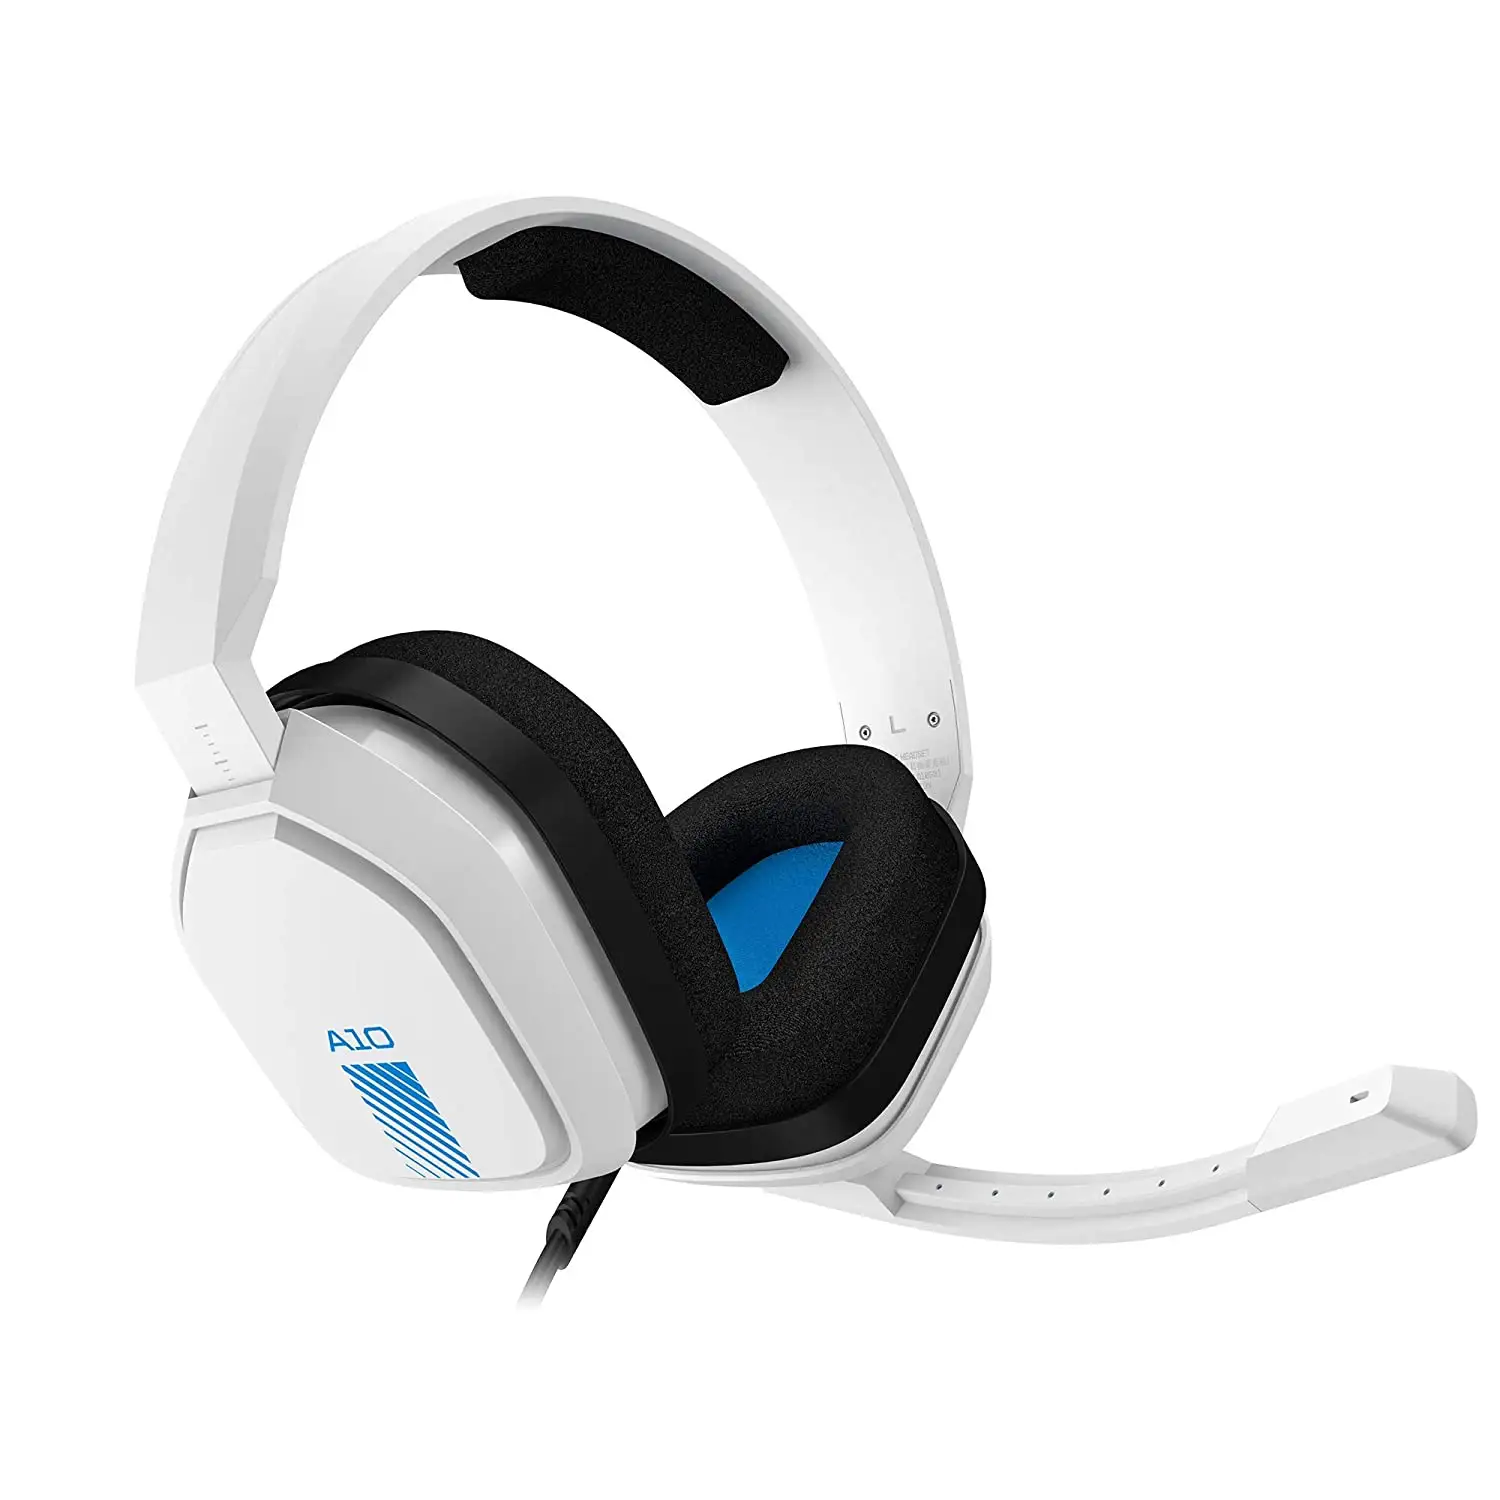 Logitech Astro A10 Wired Headset Esports Headphones 7.1 Virtual surround sound with MIC Gaming Earphone